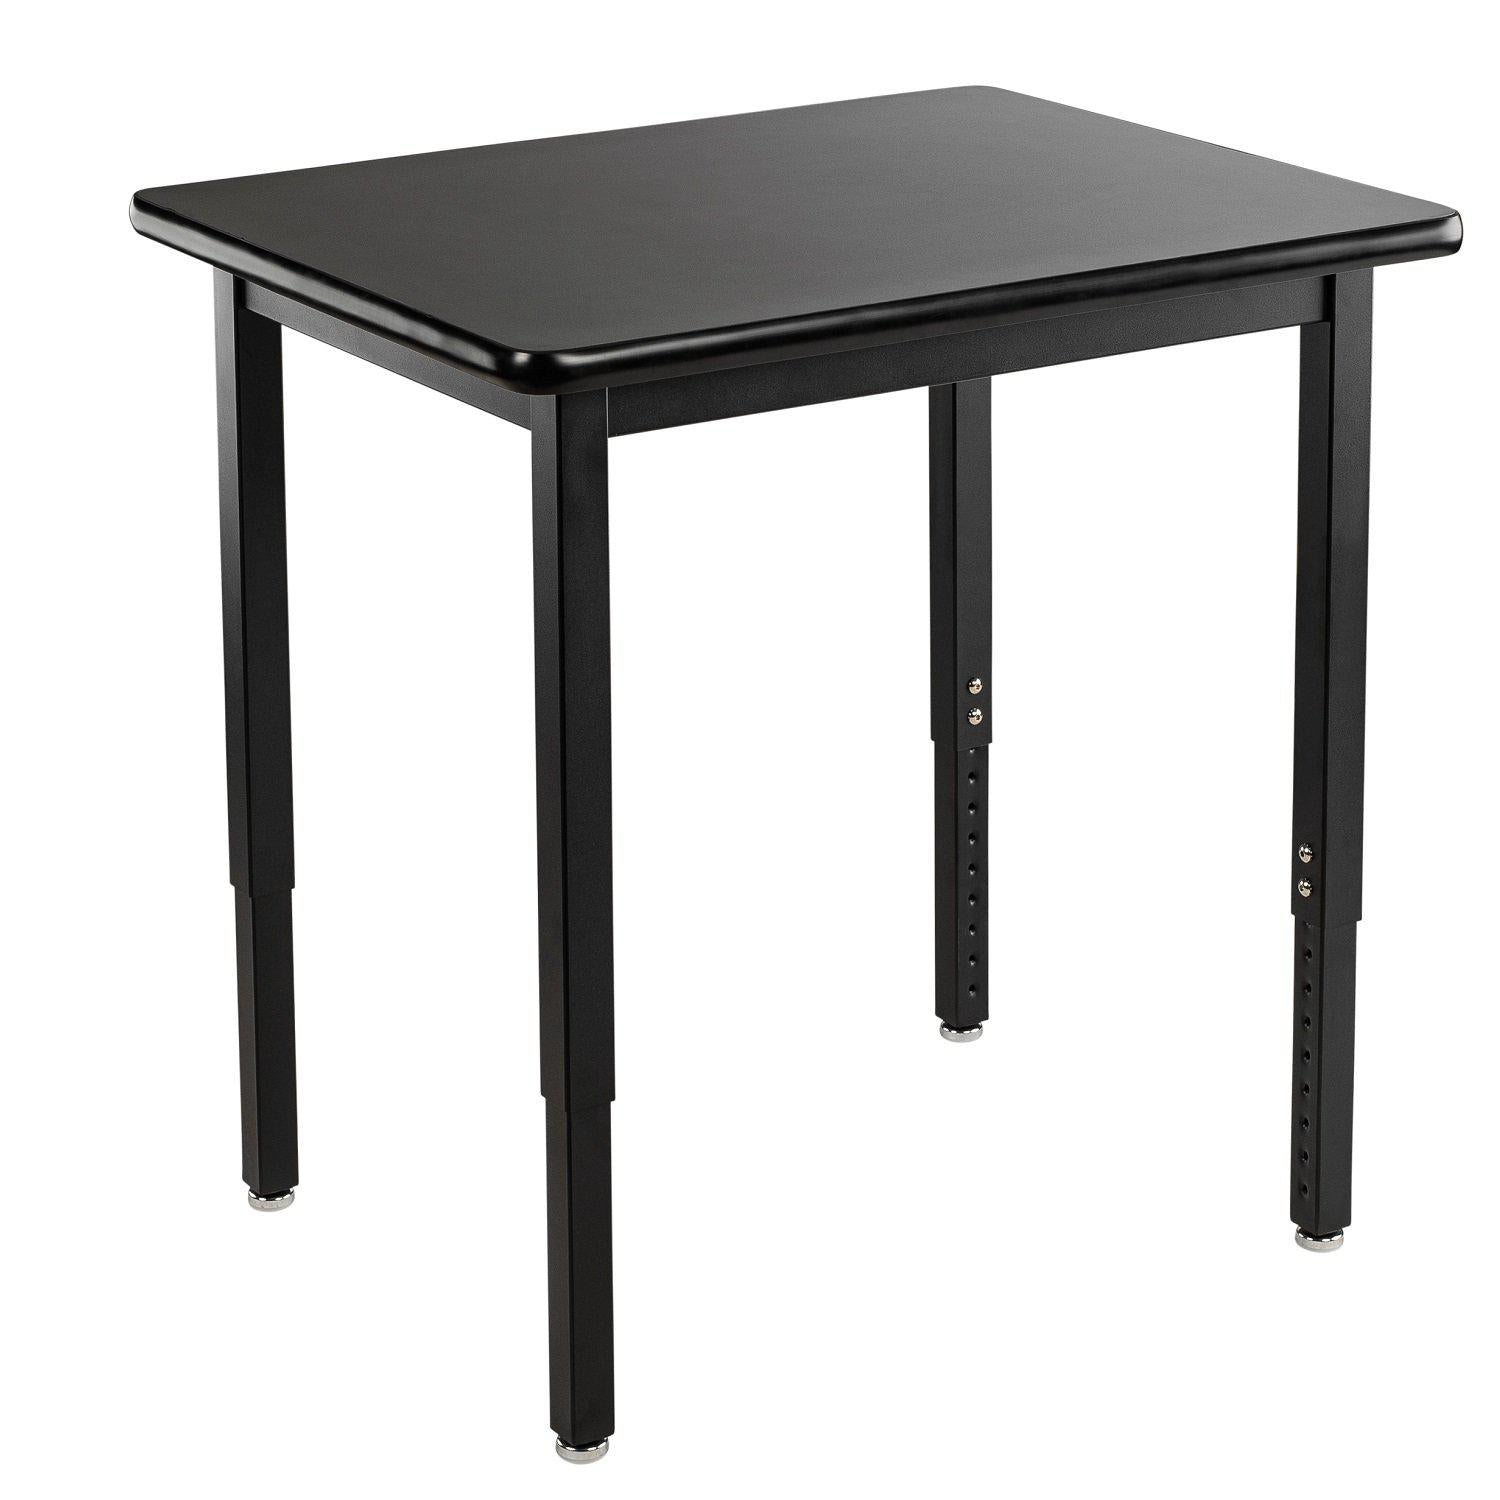 Heavy-Duty Height-Adjustable Utility Table, Black Frame, 24" x 36", High-Pressure Laminate Top with T-Mold Edge